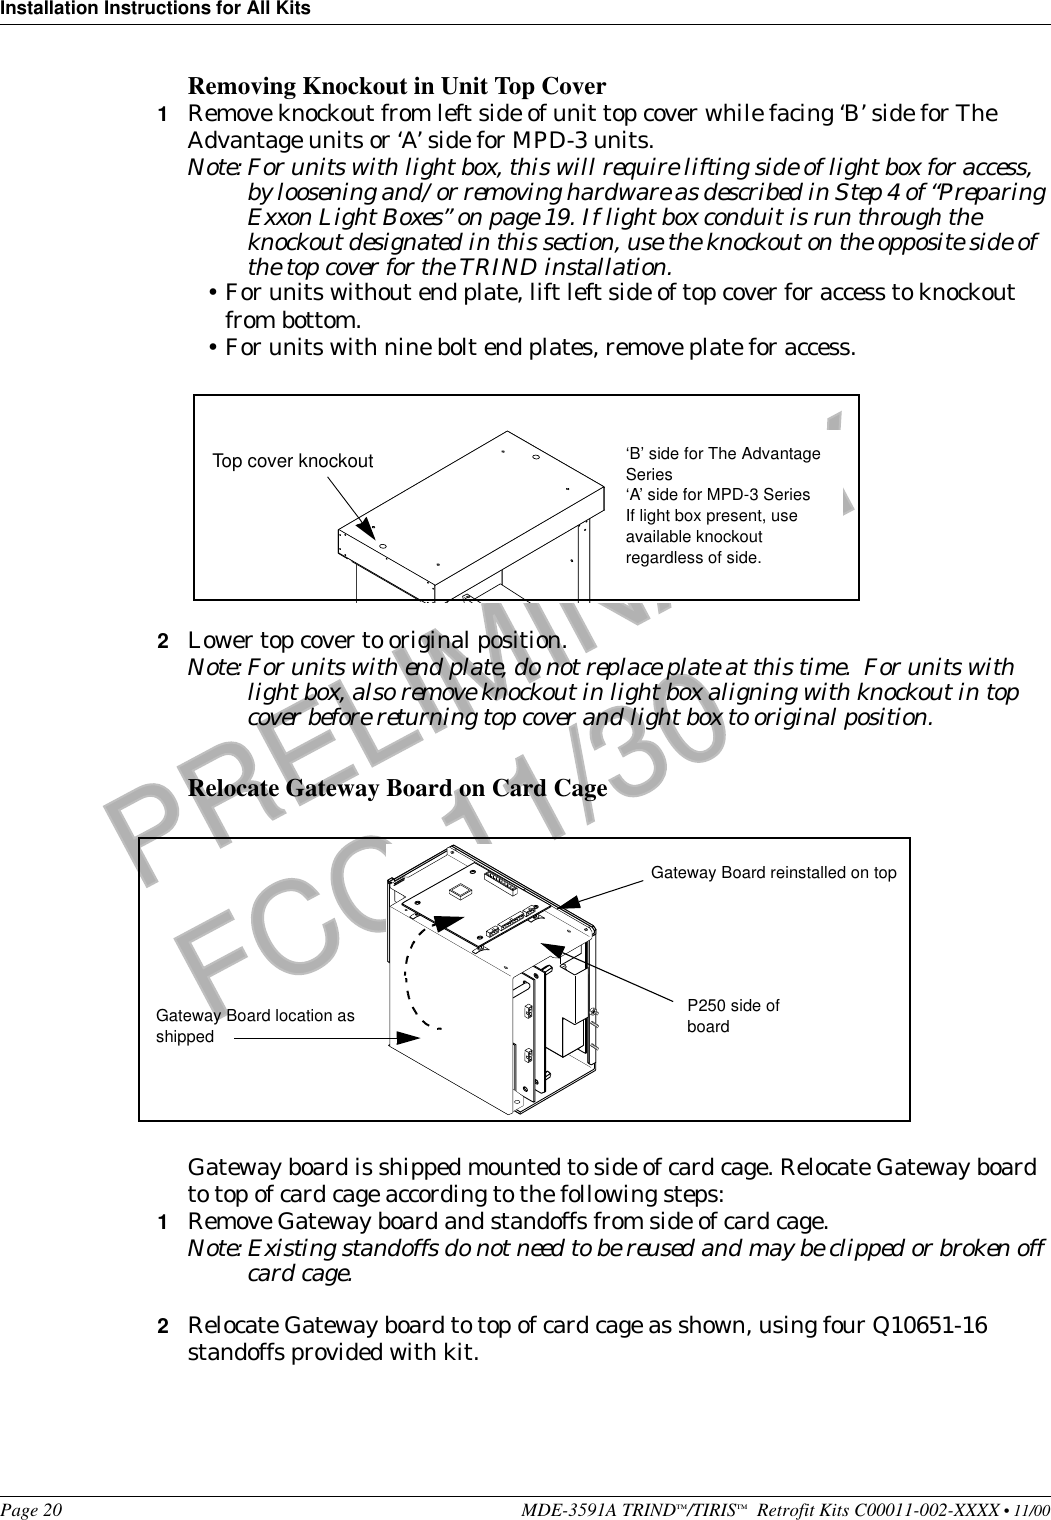 Installation Instructions for All KitsPage 20 MDE-3591A TRIND™/TIRIS™  Retrofit Kits C00011-002-XXXX • 11/00PRELIMINARYFCC 11/30Removing Knockout in Unit Top Cover1Remove knockout from left side of unit top cover while facing ‘B’ side for The Advantage units or ‘A’ side for MPD-3 units.Note: For units with light box, this will require lifting side of light box for access, by loosening and/or removing hardware as described in Step 4 of “Preparing Exxon Light Boxes” on page 19. If light box conduit is run through the knockout designated in this section, use the knockout on the opposite side of the top cover for the TRIND installation.•For units without end plate, lift left side of top cover for access to knockout from bottom.•For units with nine bolt end plates, remove plate for access.2Lower top cover to original position.Note: For units with end plate, do not replace plate at this time.  For units with light box, also remove knockout in light box aligning with knockout in top cover before returning top cover and light box to original position.    Relocate Gateway Board on Card CageGateway board is shipped mounted to side of card cage. Relocate Gateway board to top of card cage according to the following steps:1Remove Gateway board and standoffs from side of card cage.Note: Existing standoffs do not need to be reused and may be clipped or broken off card cage. 2Relocate Gateway board to top of card cage as shown, using four Q10651-16 standoffs provided with kit.Top cover knockout ‘B’ side for The Advantage Series‘A’ side for MPD-3 SeriesIf light box present, use available knockout regardless of side.Gateway Board location as shippedGateway Board reinstalled on topP250 side of board